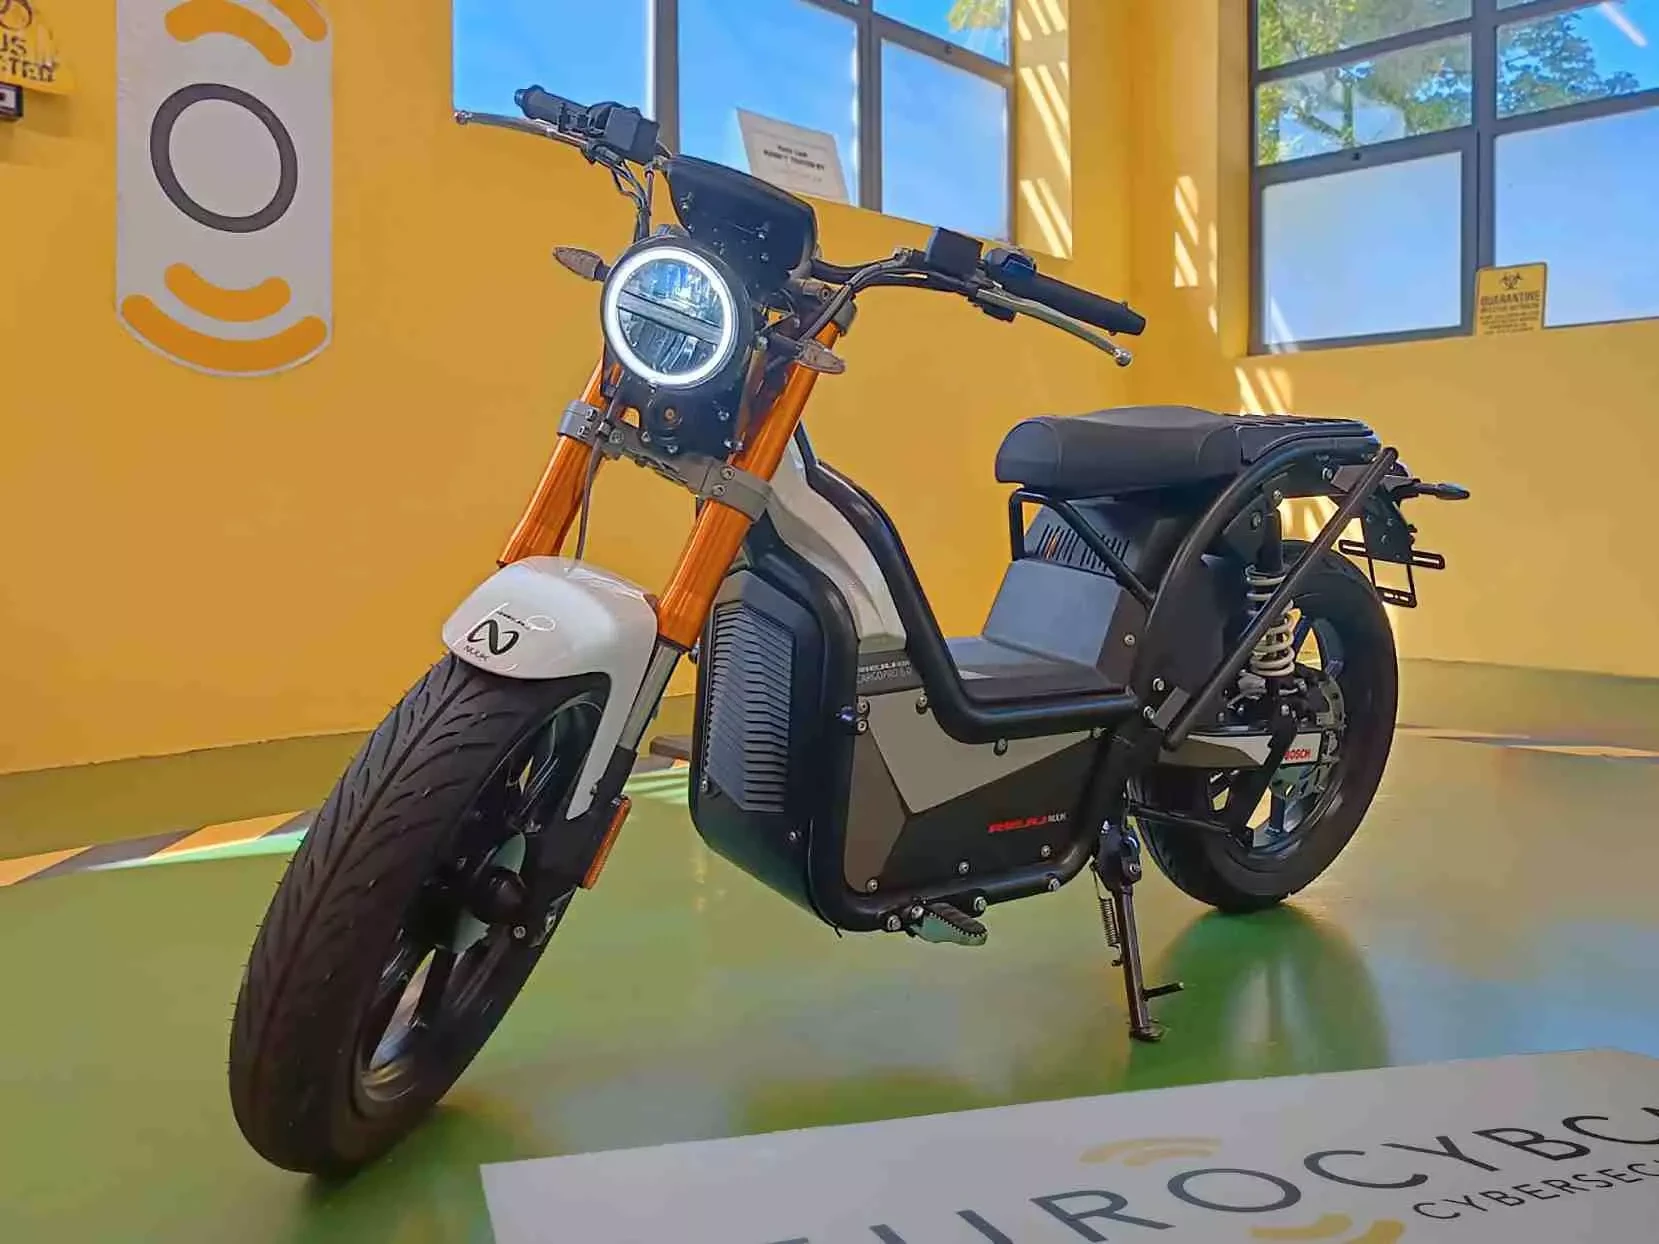 Revealed: The world's first (and so far, only) 'cyber-secure' vehicle is a European electric motorcycle